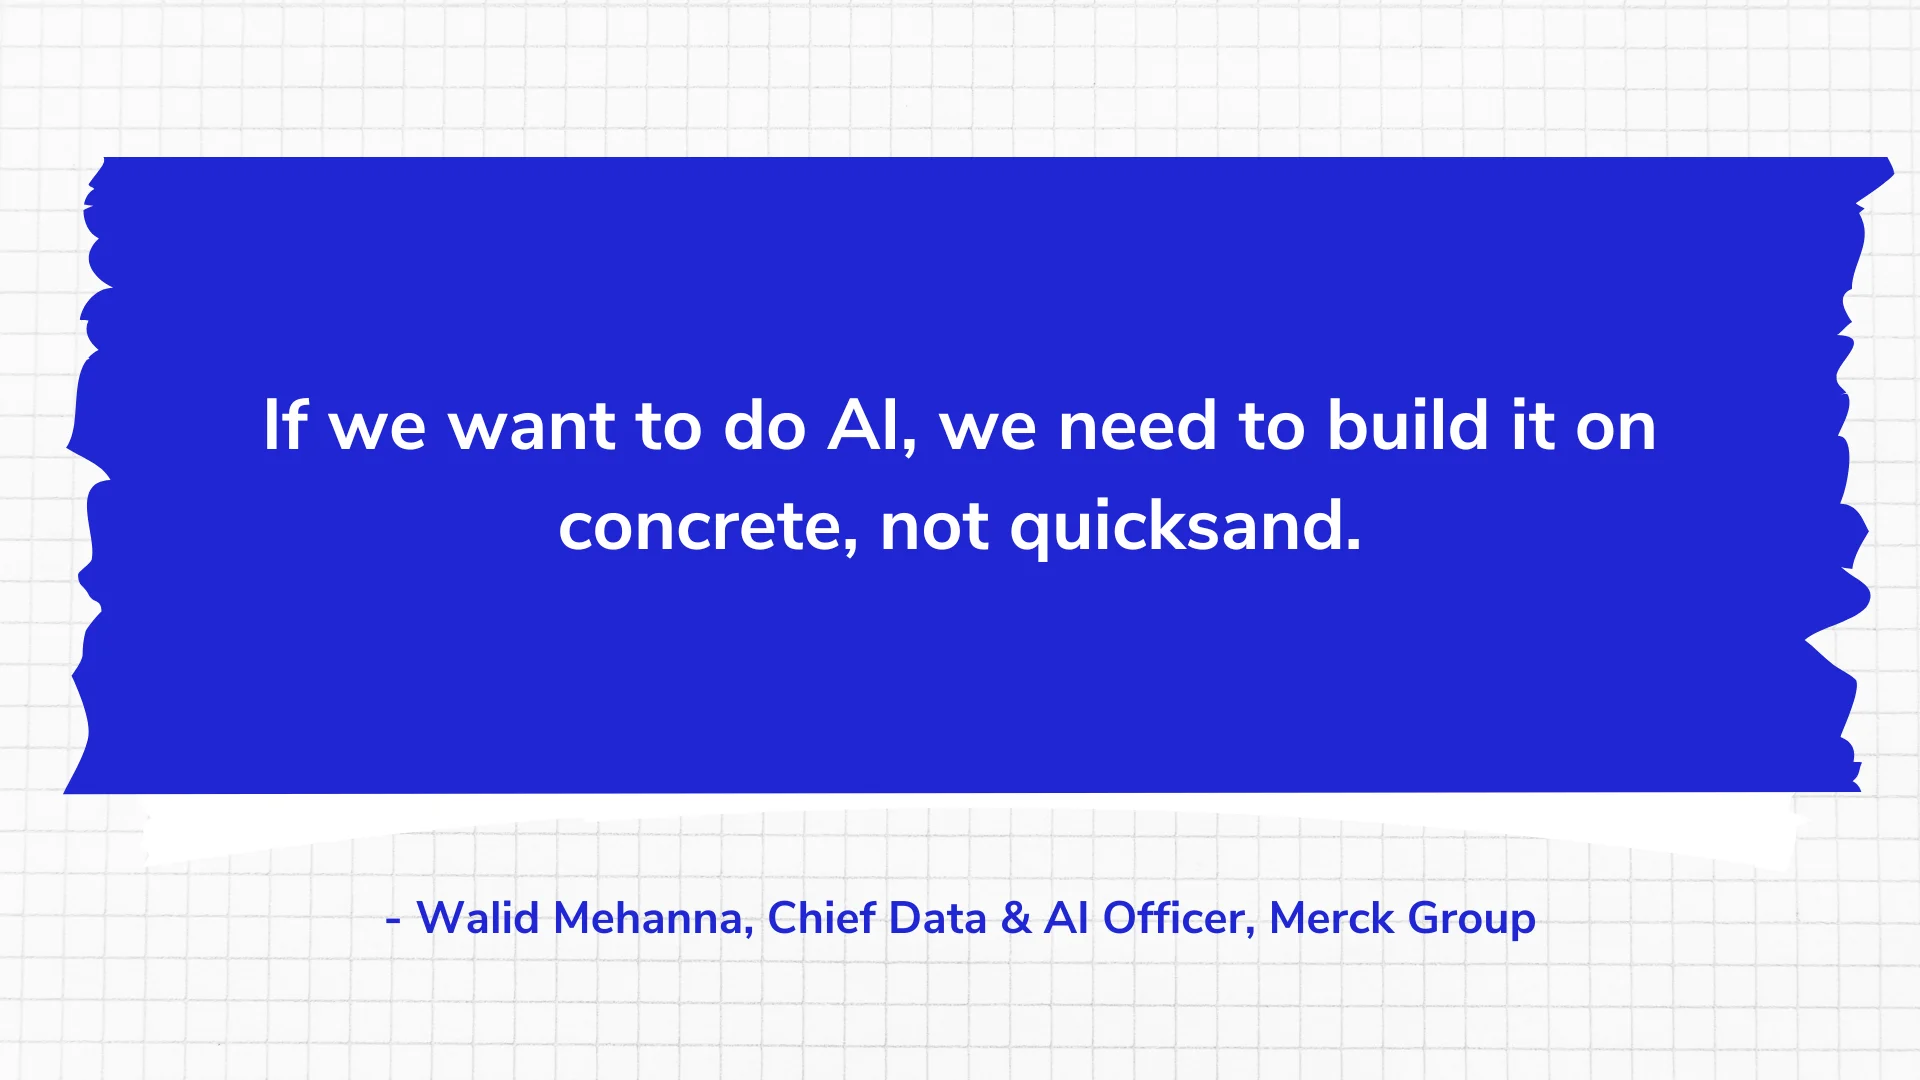 If we want to do AI, we need to build it on concrete, not quicksand.